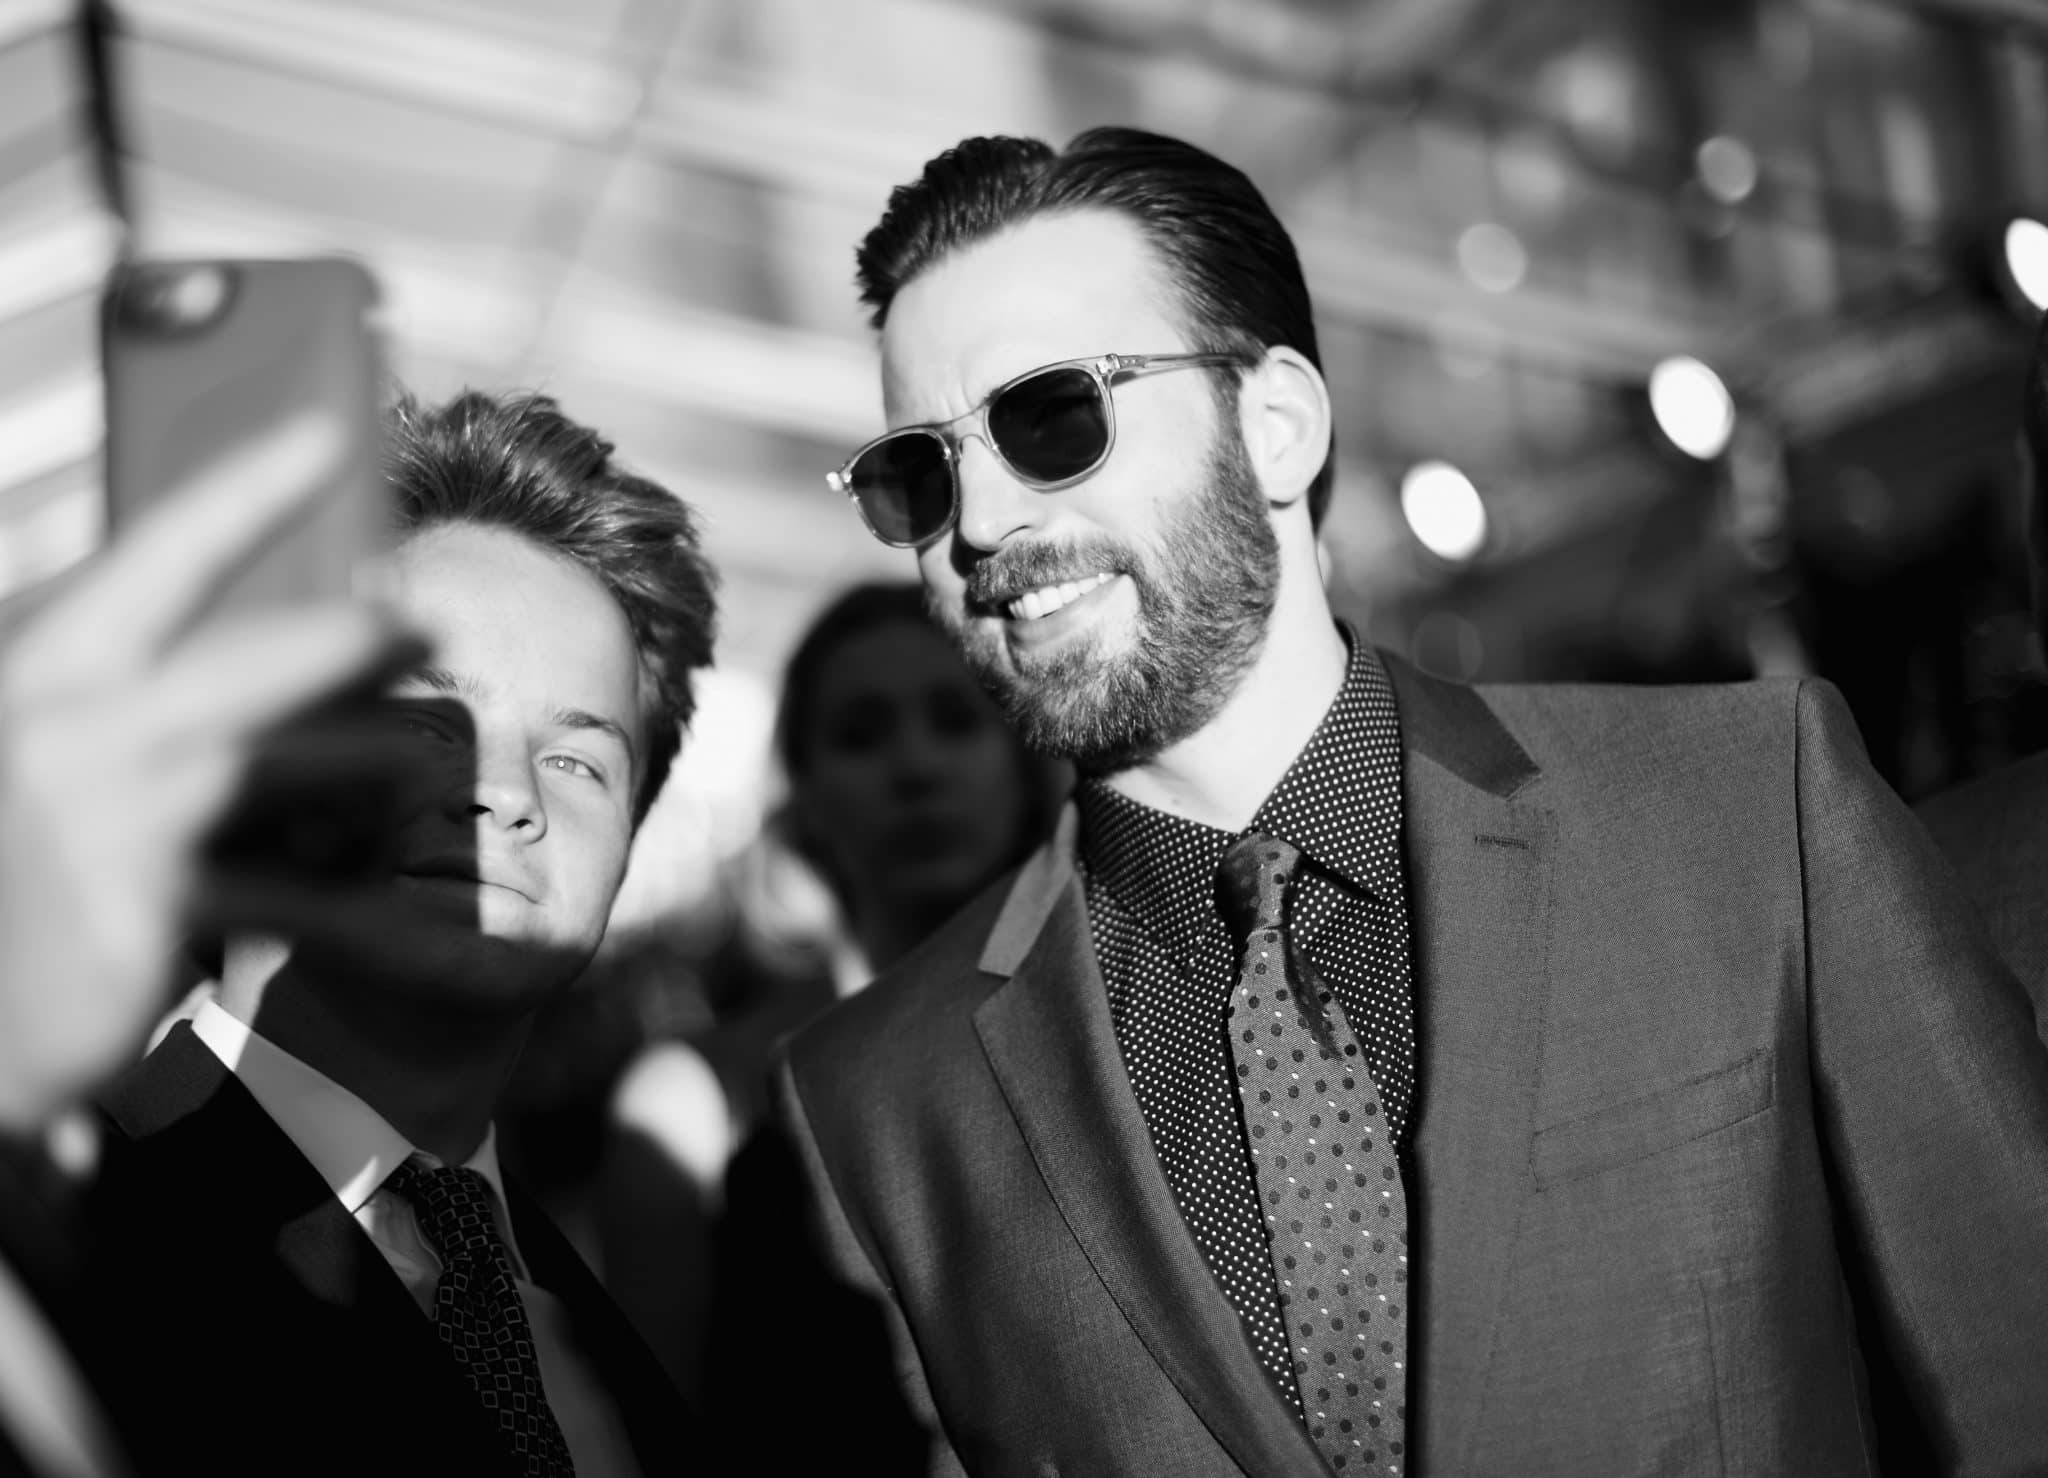 HOLLYWOOD, CALIFORNIA - APRIL 12: (EDITORS NOTE: Image has been shot in black and white..Color version not available.) Actor Chris Evans takes a selfie at The World Premiere of Marvel's "Captain America: Civil War" at Dolby Theatre on April 12, 2016 in Los Angeles, California. (Photo by Charley Gallay/Getty Images for Disney) *** Local Caption *** Chris Evans